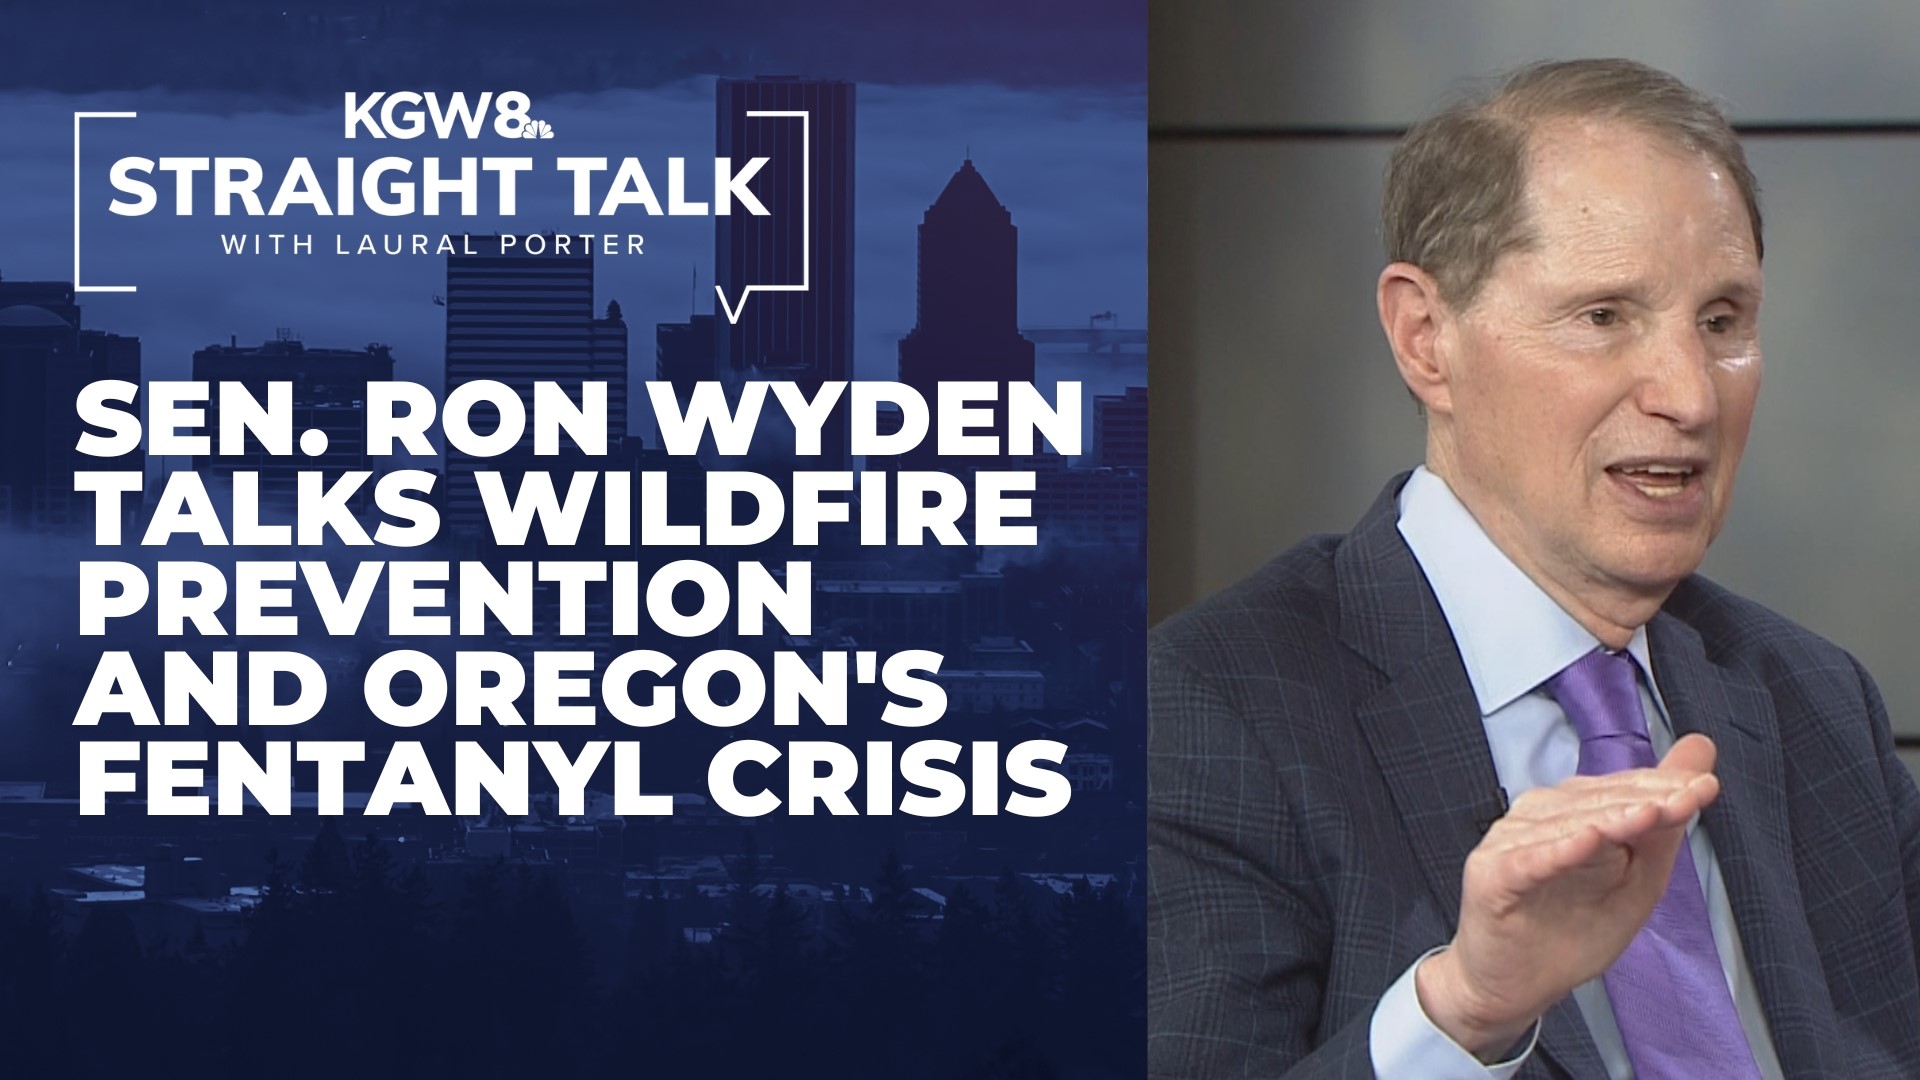 Sen. Wyden also discussed the campaign to bring a WNBA team to Portland and the future of the Portland Trail Blazers.